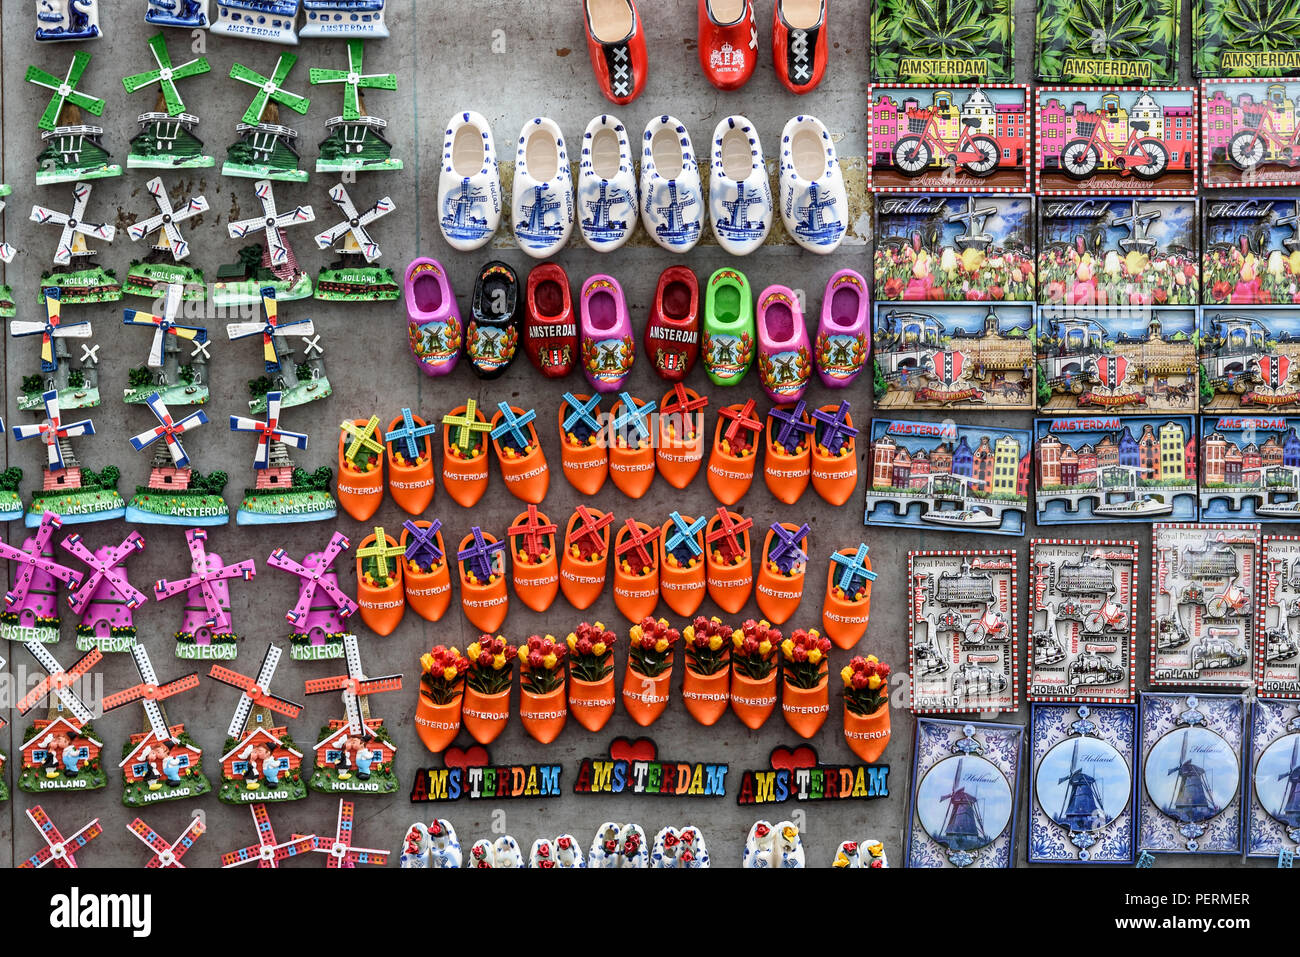 multiple, colorful fridge magnets from Amsterdam and Holland, displayed for sale Stock Photo